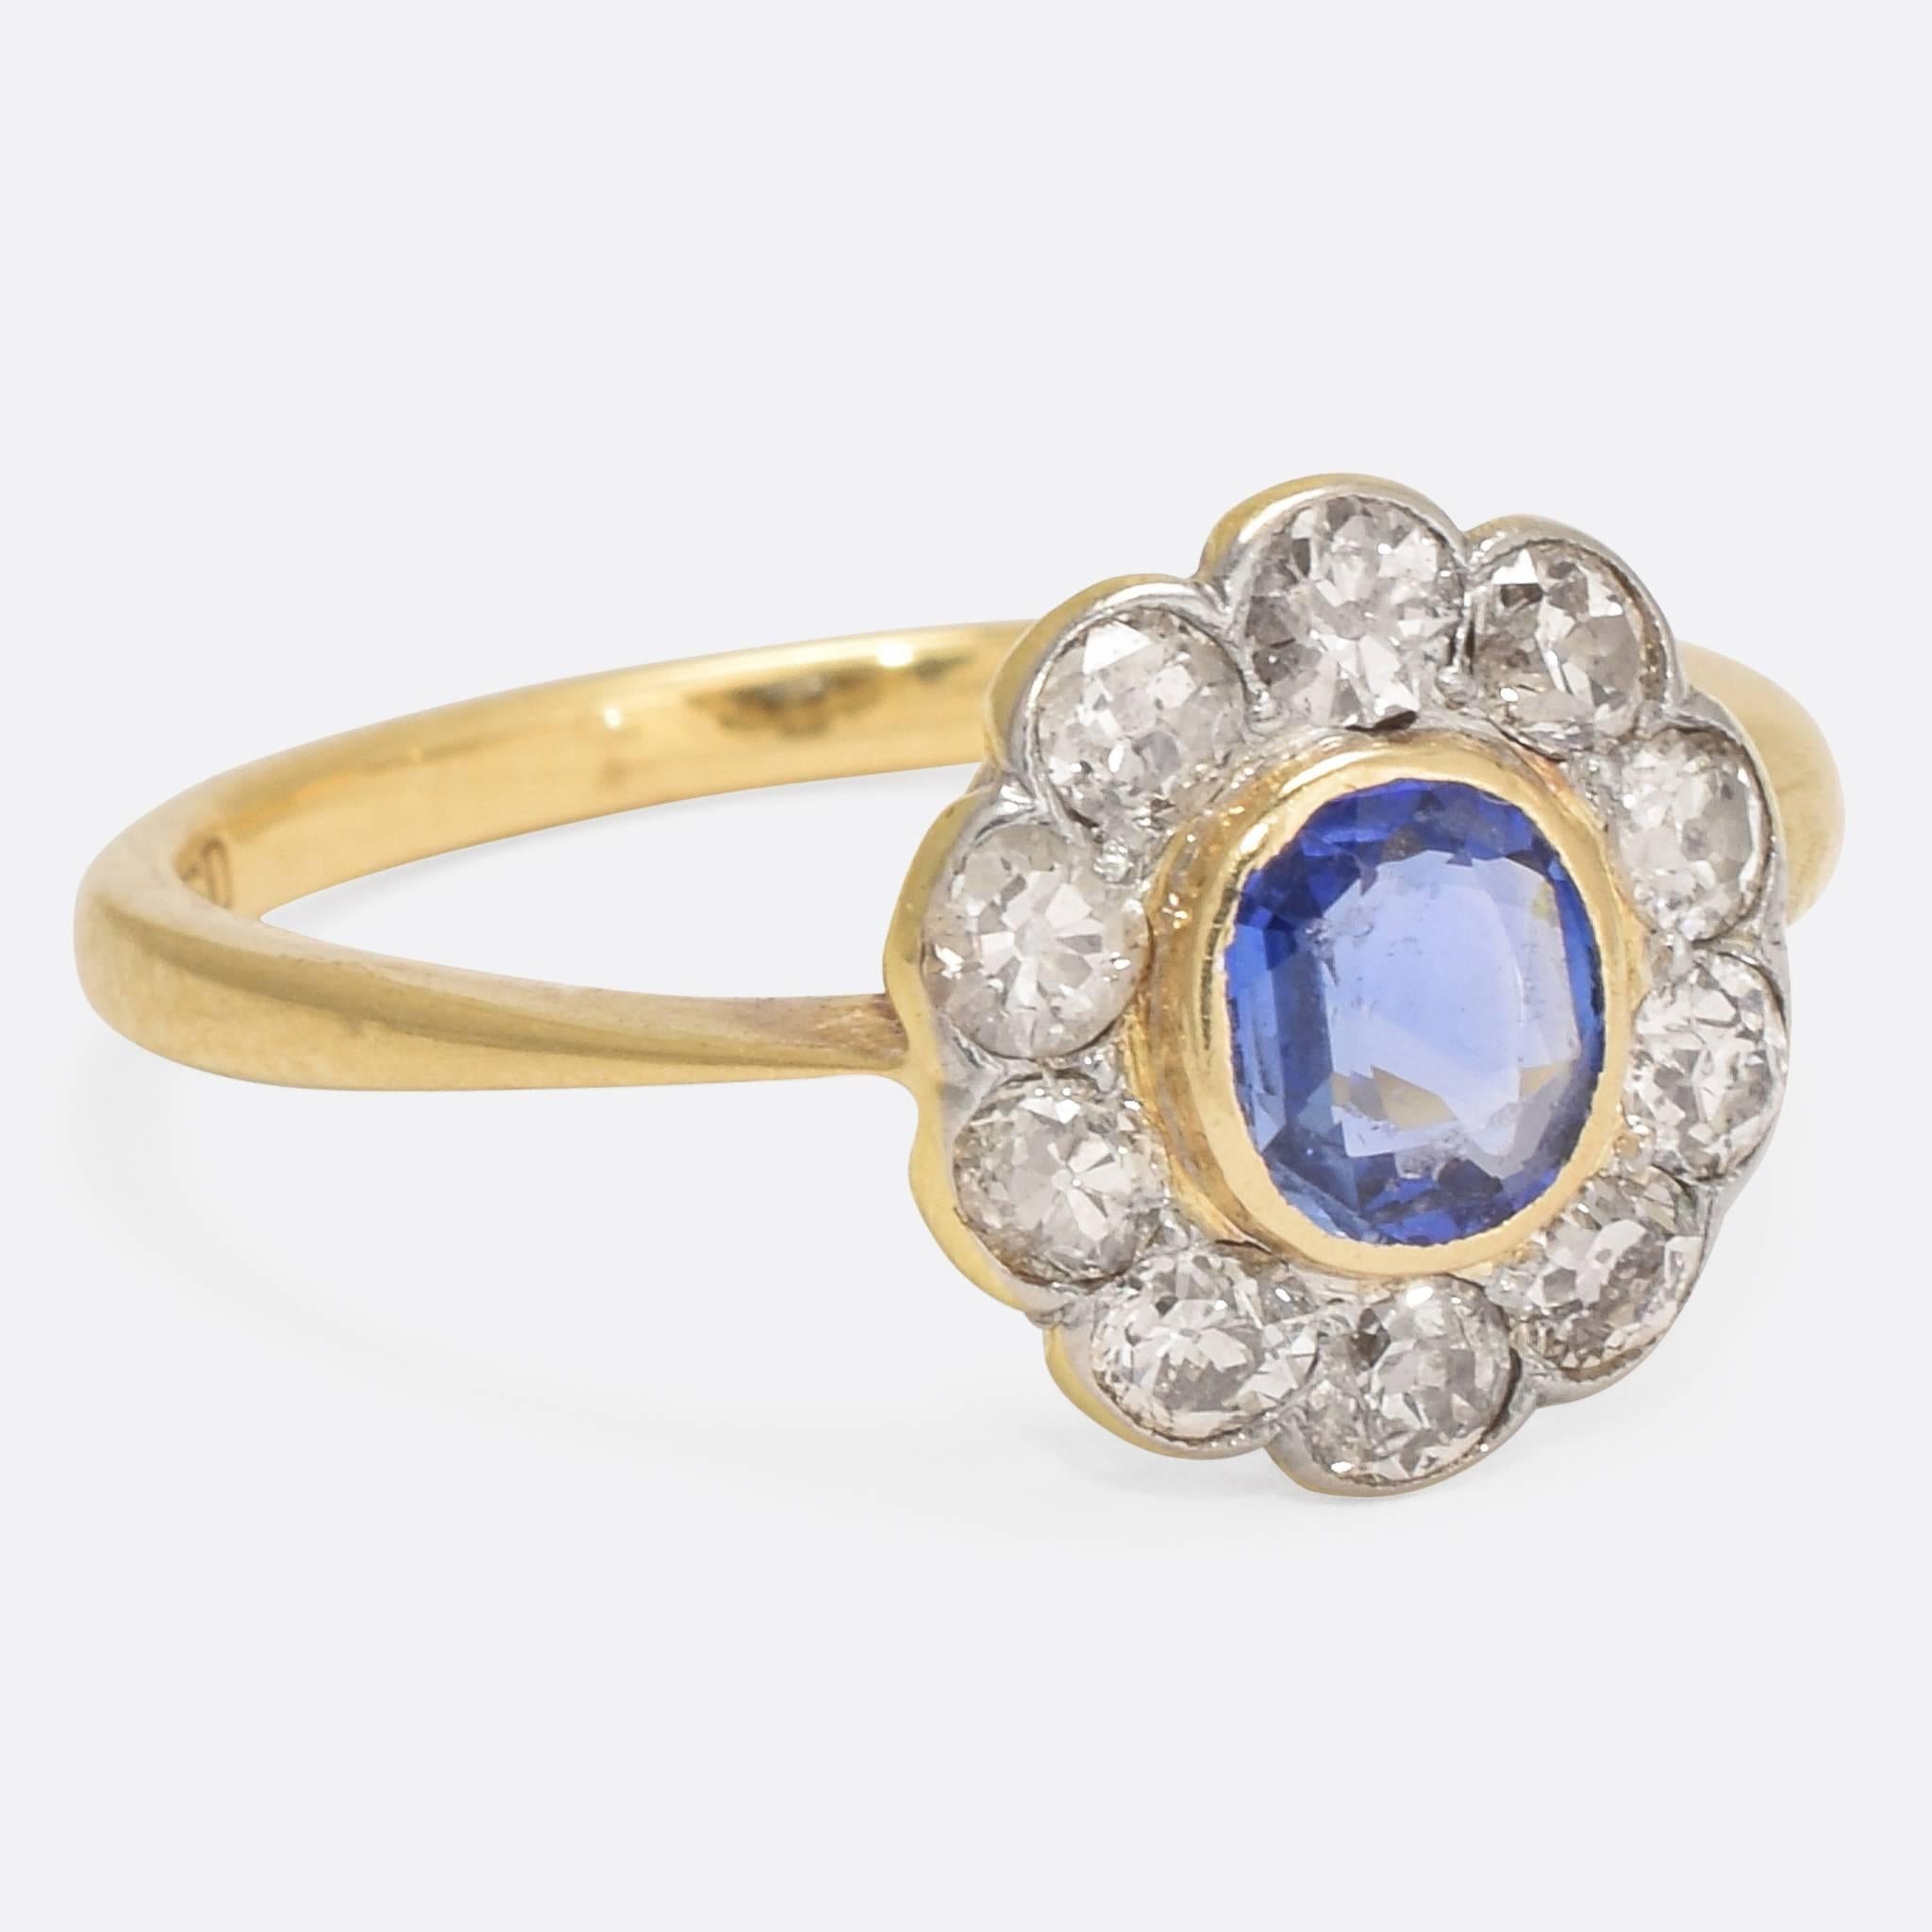 An especially beautiful Edwardian Sapphire and Diamond cluster engagement ring, dating to c.1910. The central cornflower blue sapphire is surrounded by a .80ct cluster of old Euro diamonds - the latter set in platinum. The band is modelled in 18k